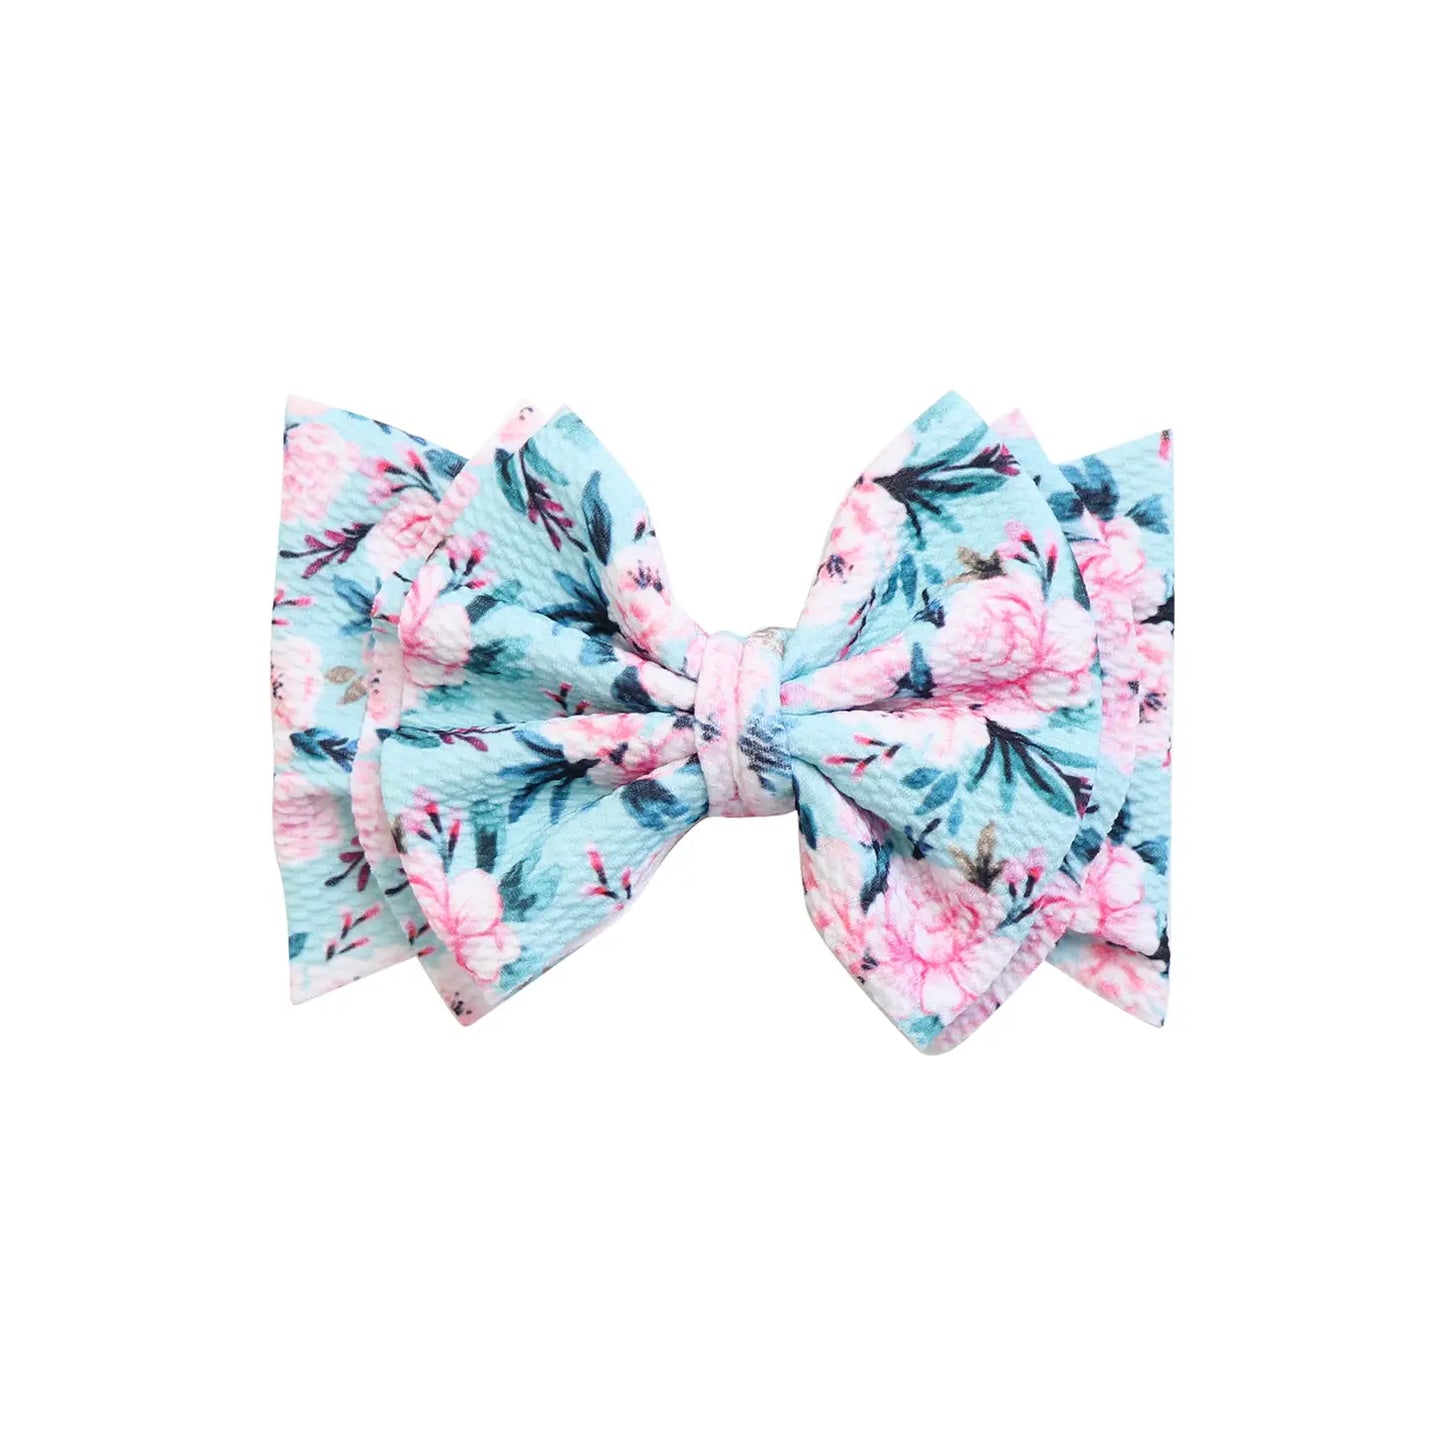 Big bow with a light blue background with  light pink and white flowers with blue and green leaves